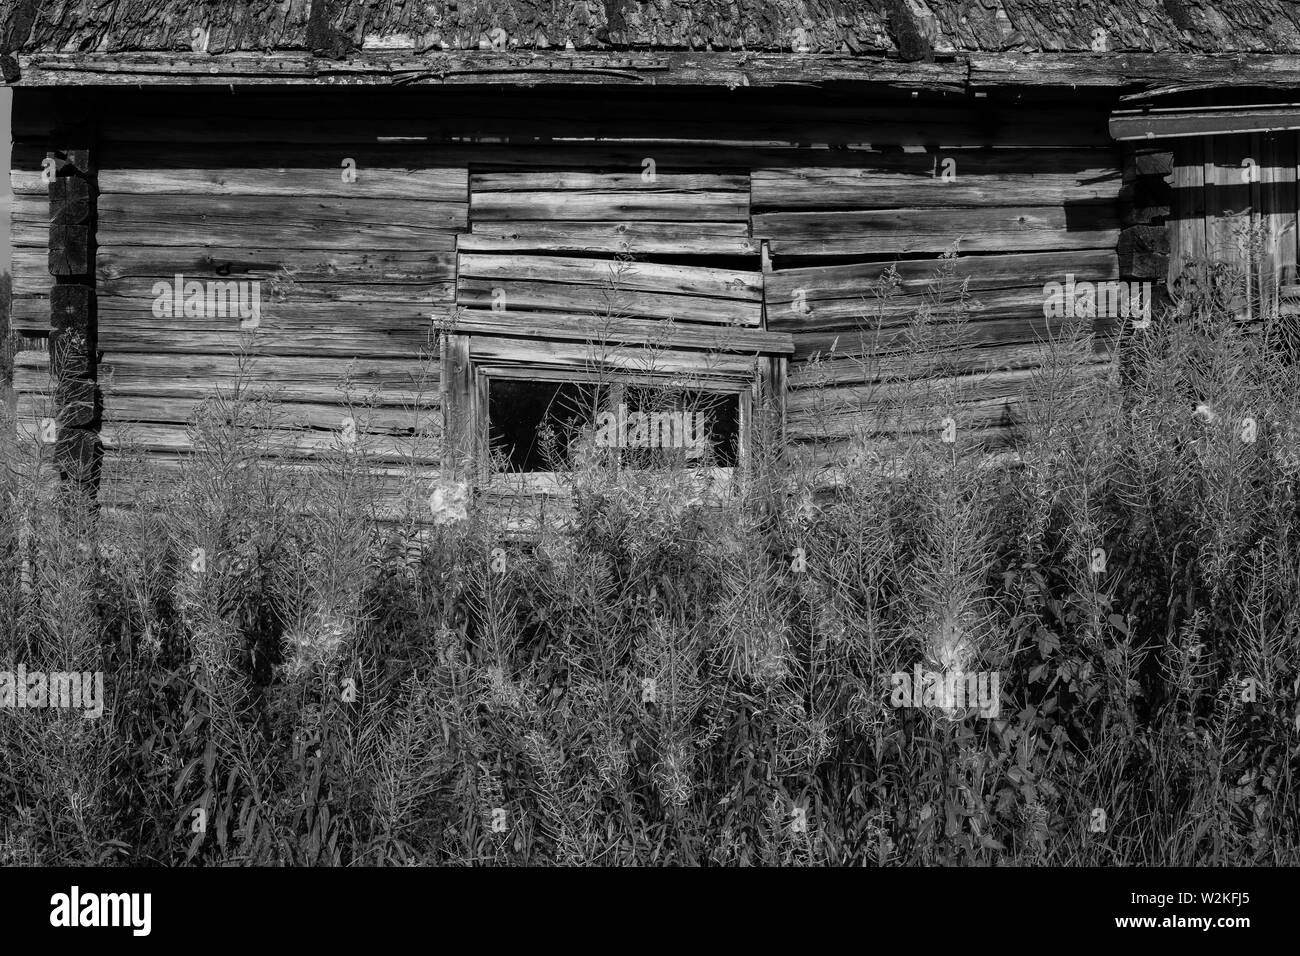 Willowherbs (fireweeds) in front of an old, weathered log barn in disrepair at abandoned farmstead in Ylöjärvi, Finland Stock Photo